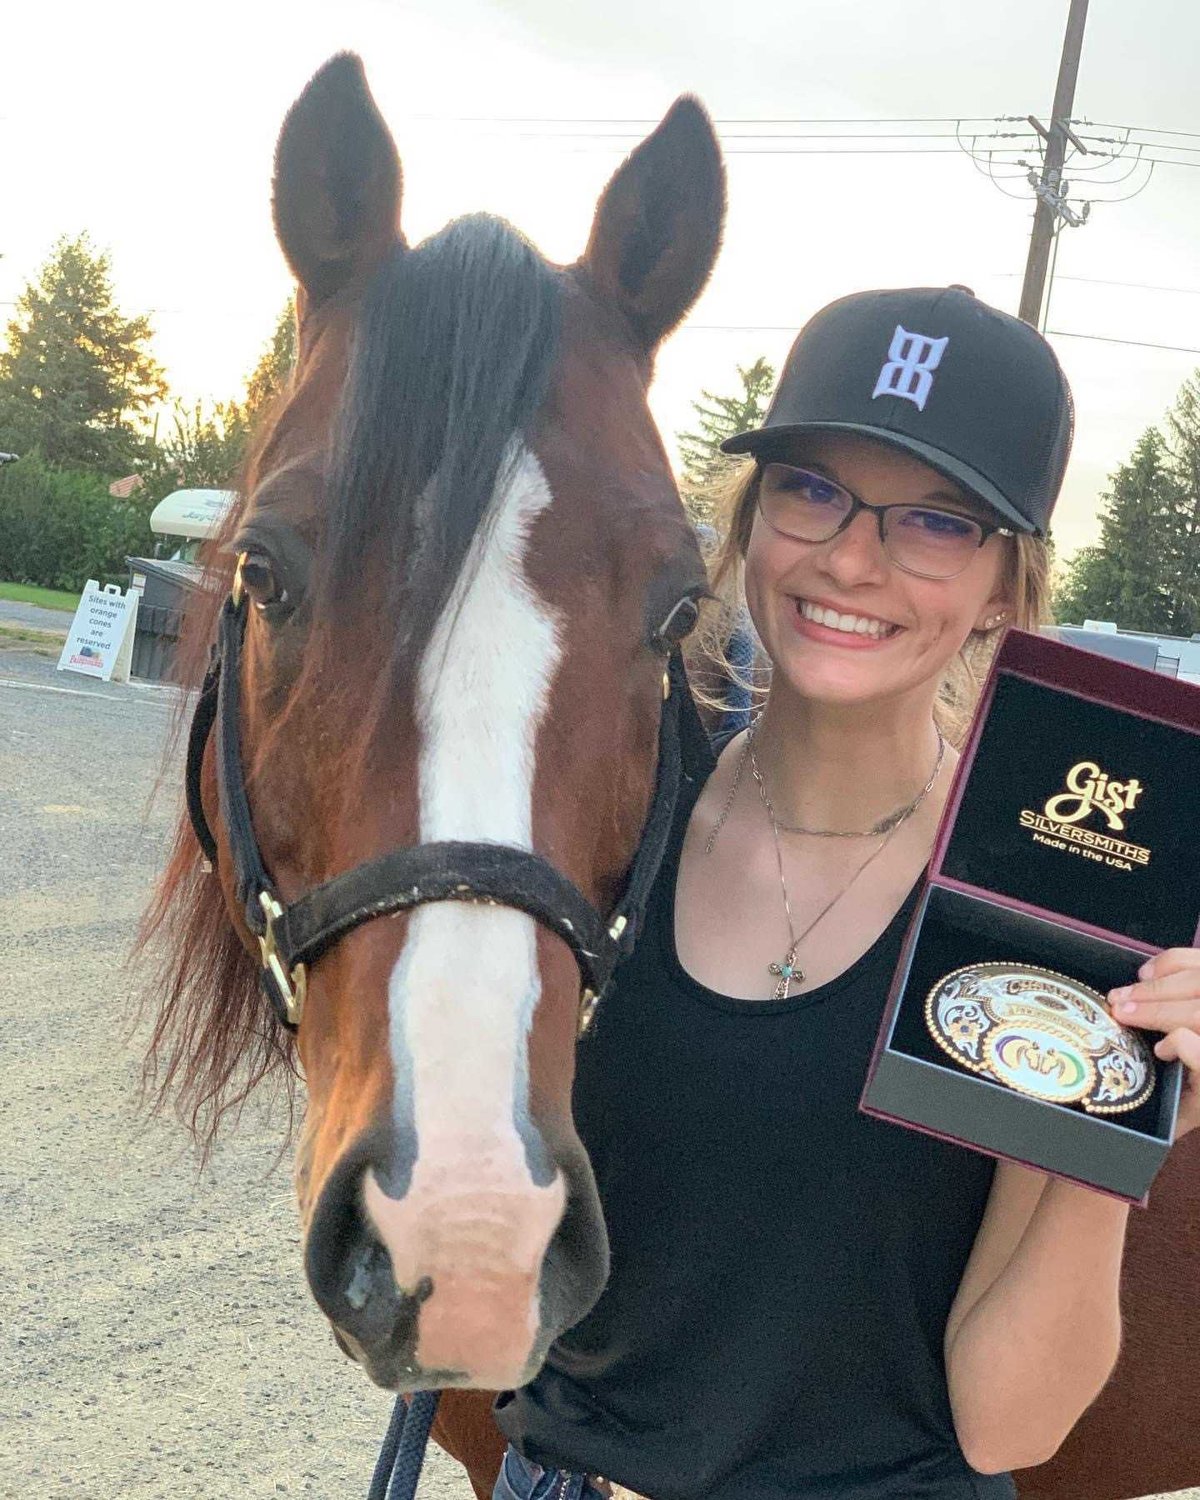 Adna junior Savanna Ridley holds up her first place buckle in a photo with her horse Guido after earning the gold in reining.